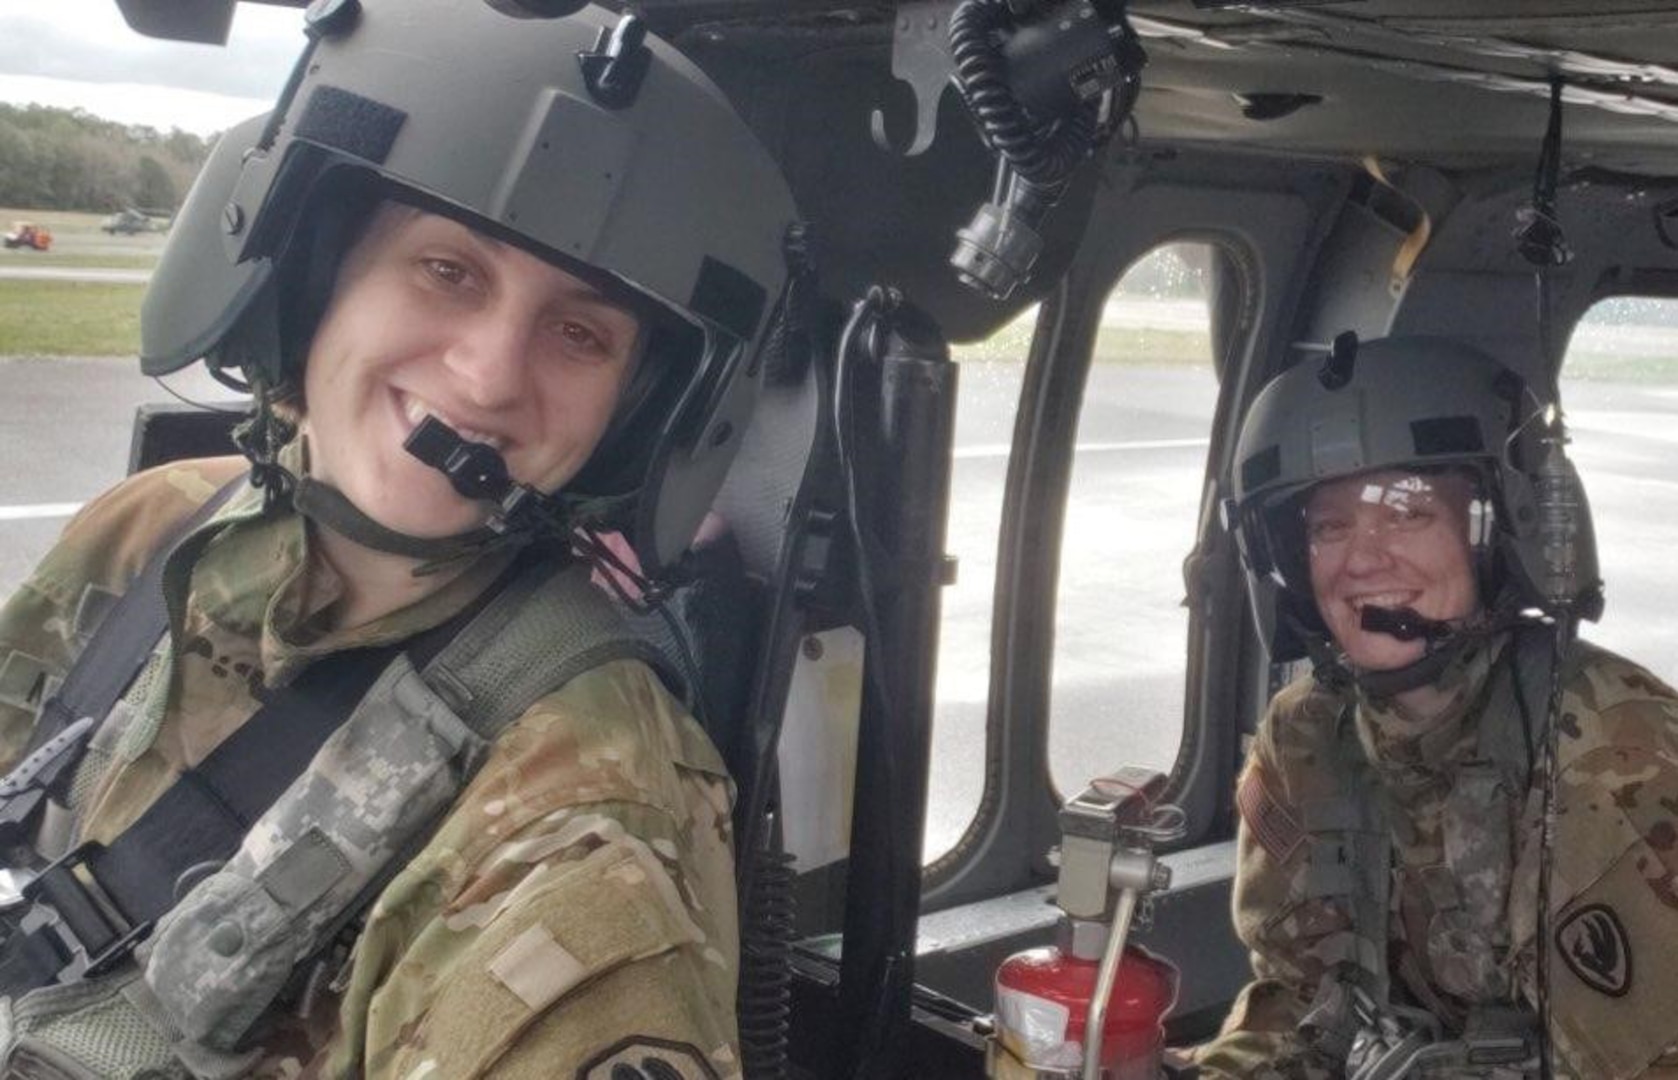 Warrant Officer Kayla Meadors, left, 28, with the 1-244th Assault Helicopter Battalion and one of the newest pilots in the Louisiana National Guard, responded to Hurricane Laura during emergency operations. She is shown in the cockpit of a helicopter Sept. 11, 2020.